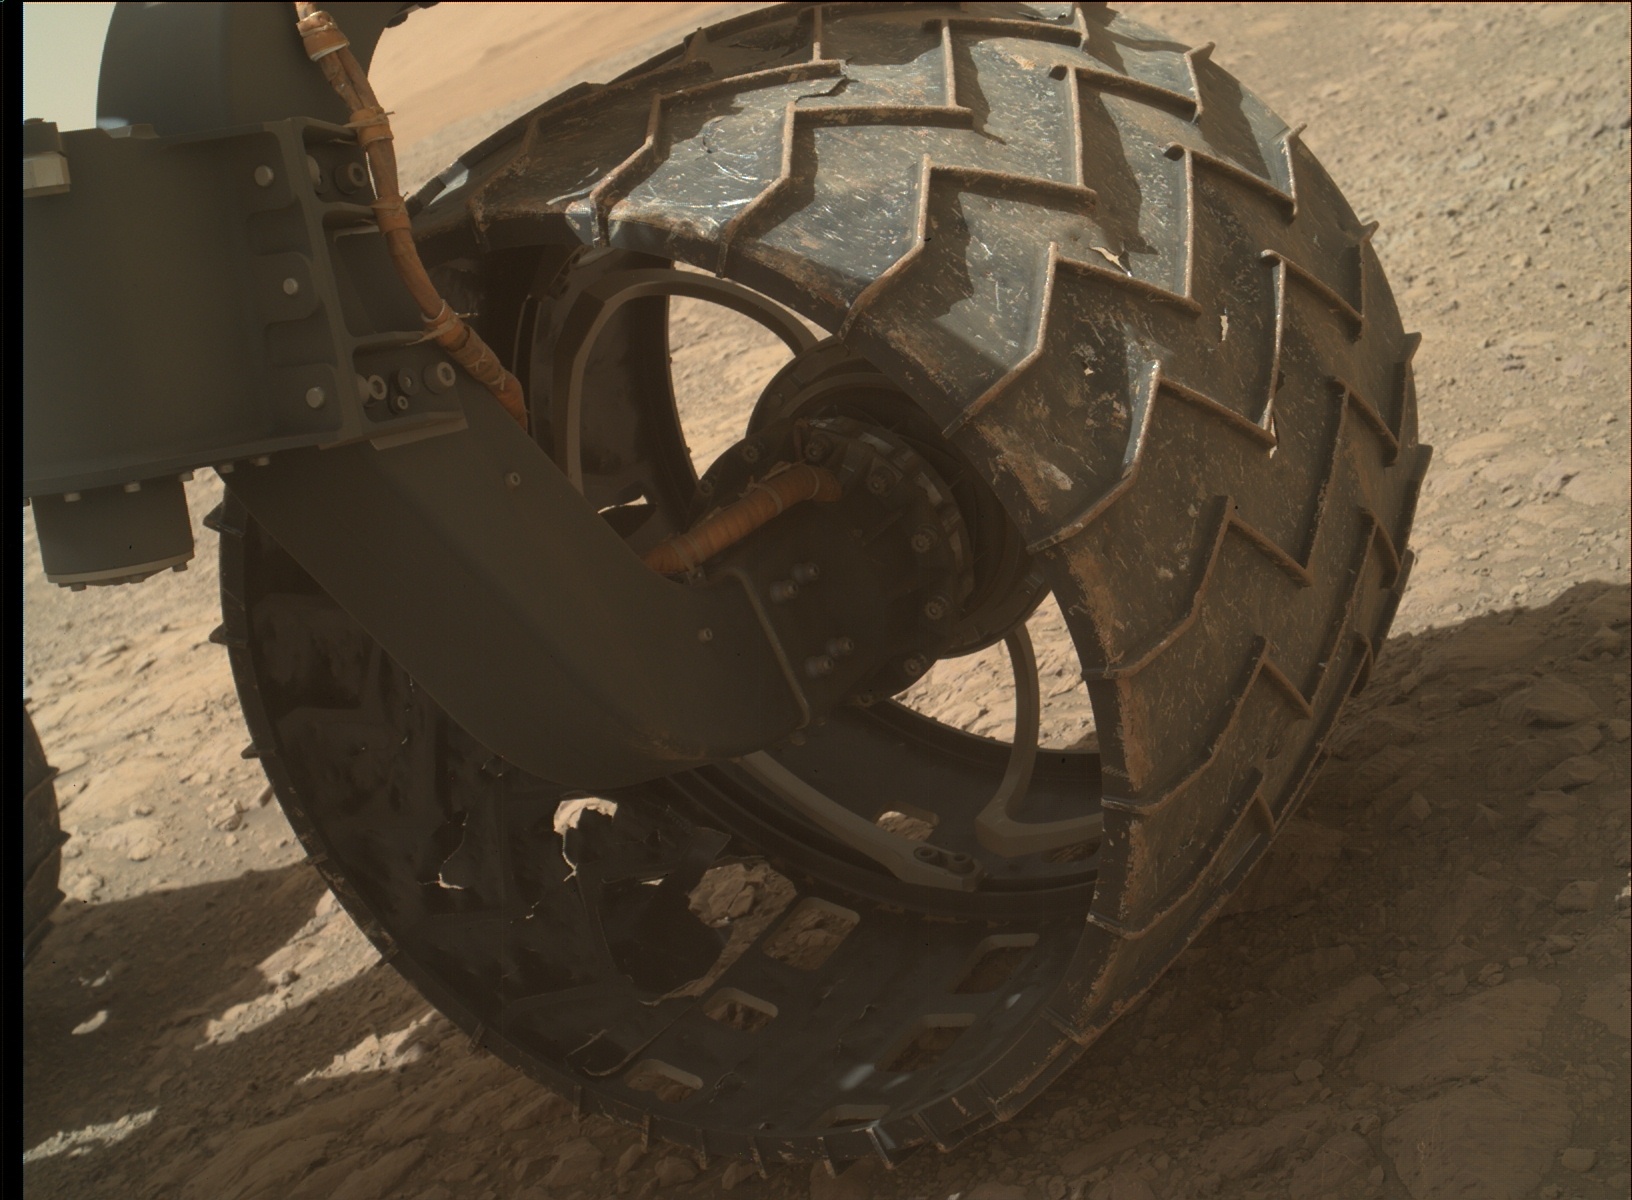 Nasa's Mars rover Curiosity acquired this image using its Mars Hand Lens Imager (MAHLI) on Sol 1887